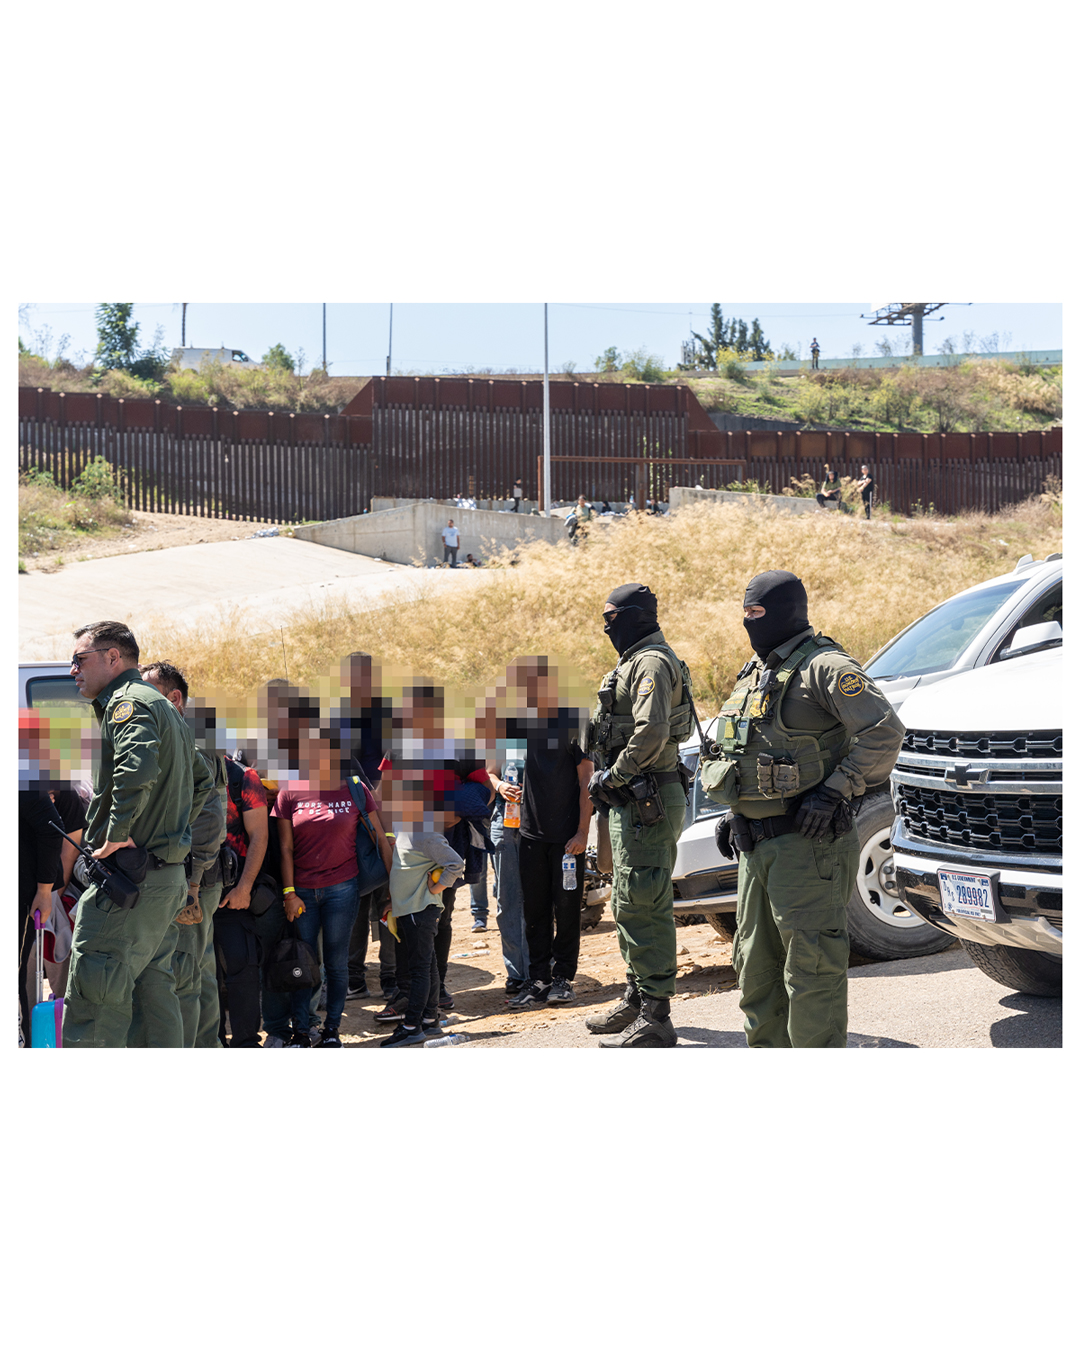 Several border patrol agents stand at the head of a group of migrants. The group includes women and children; they are encircled by border patrol cars while the agents look on.